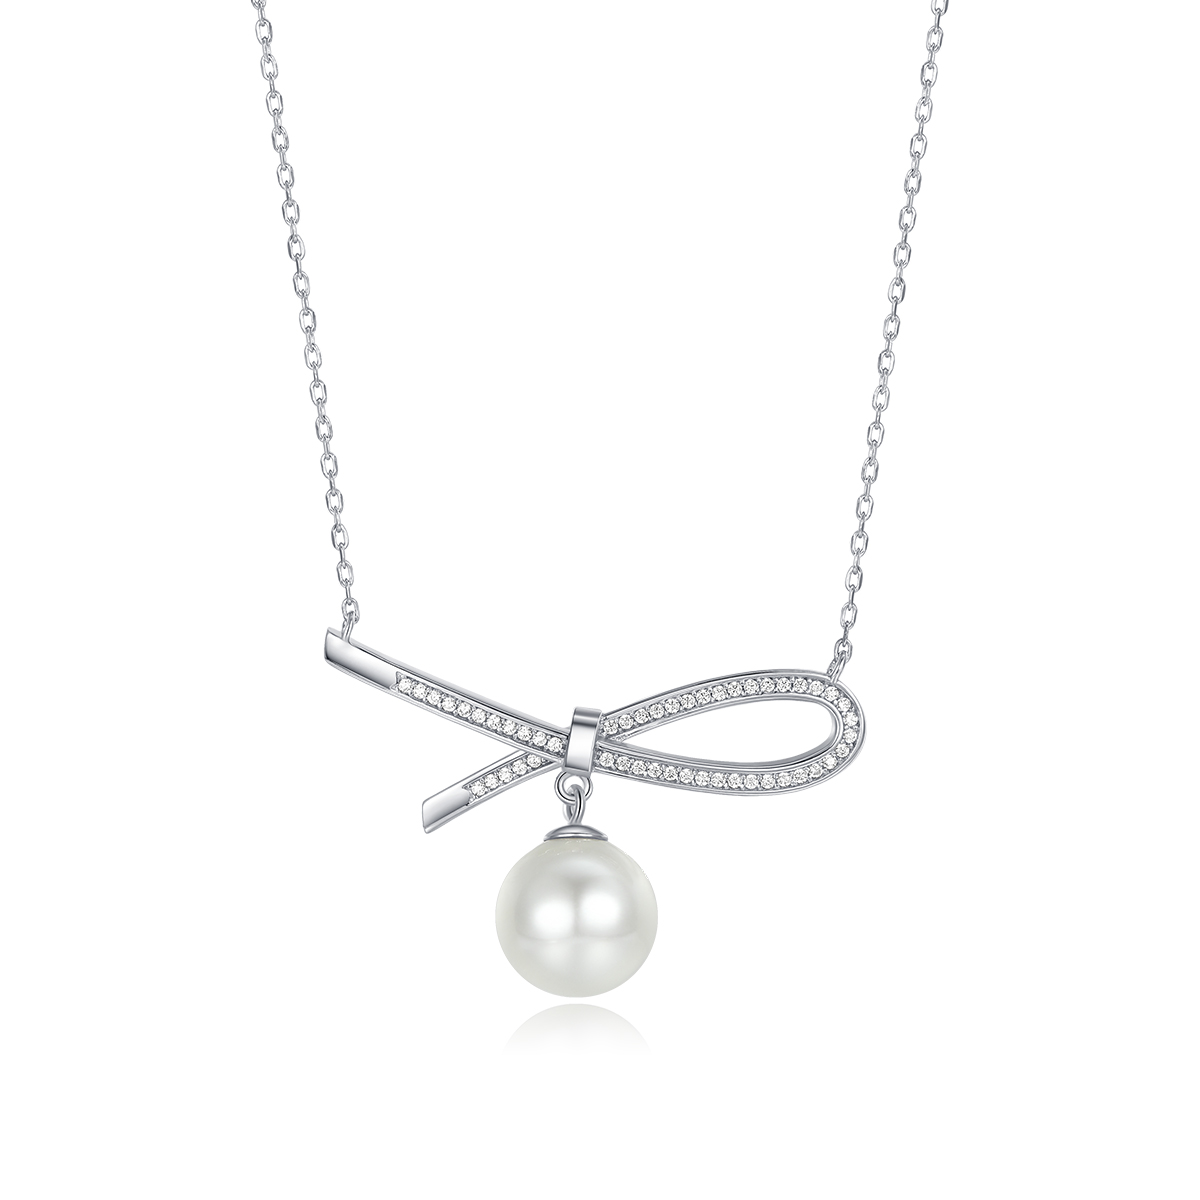 Bowknot bead necklace Ruyi knot S925 silver-inlaid zircon necklace suitable for daily use